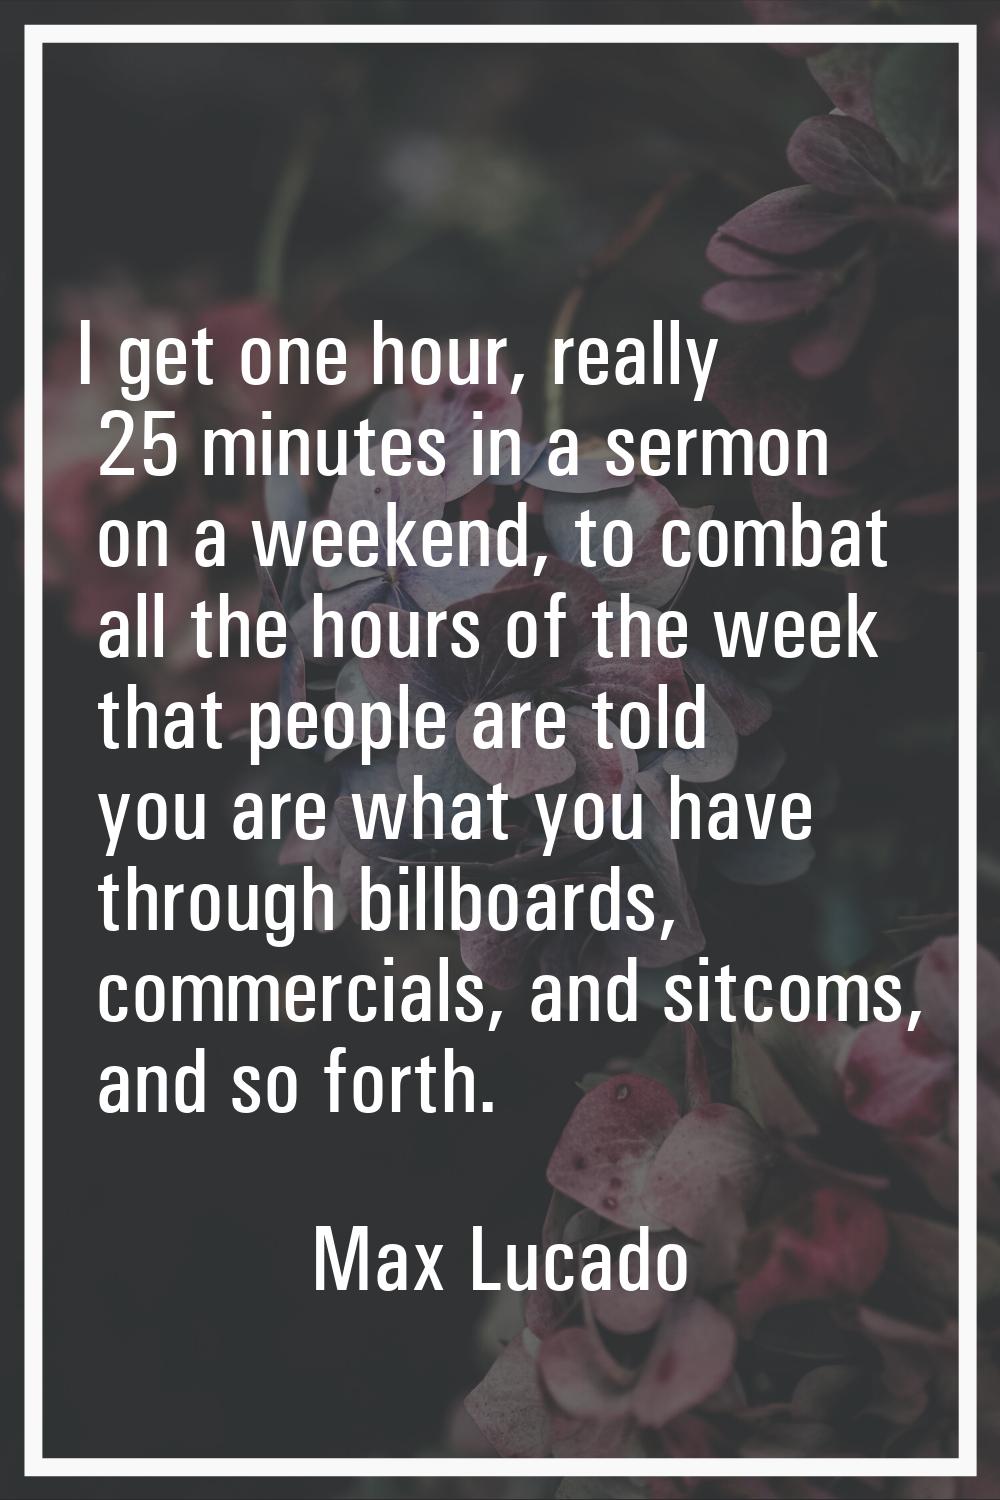 I get one hour, really 25 minutes in a sermon on a weekend, to combat all the hours of the week tha